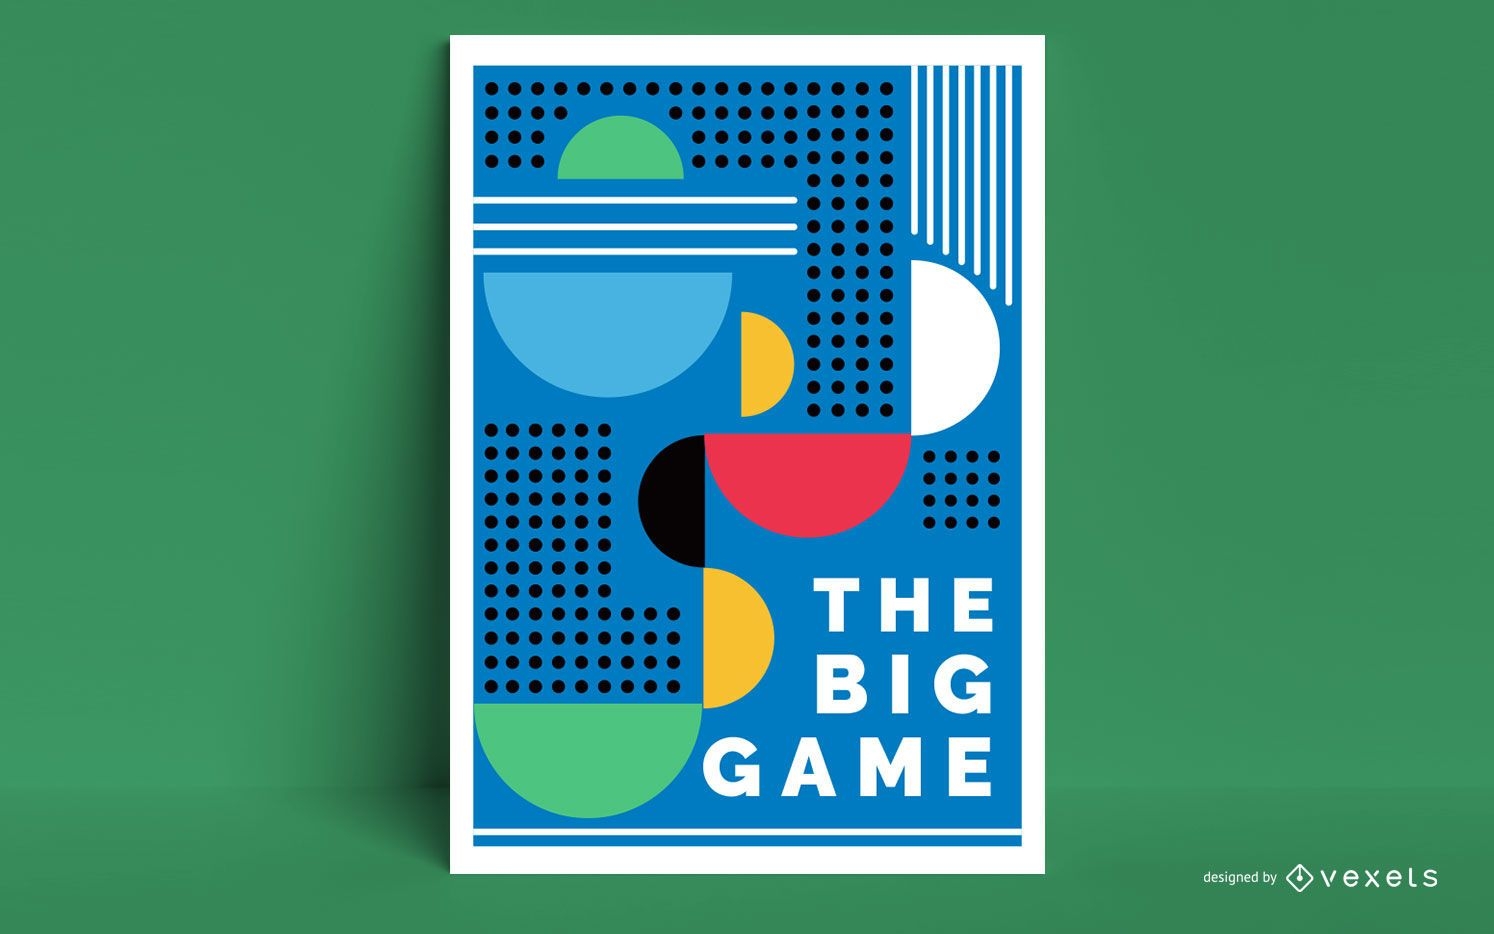 The big game 2020 Poster Design